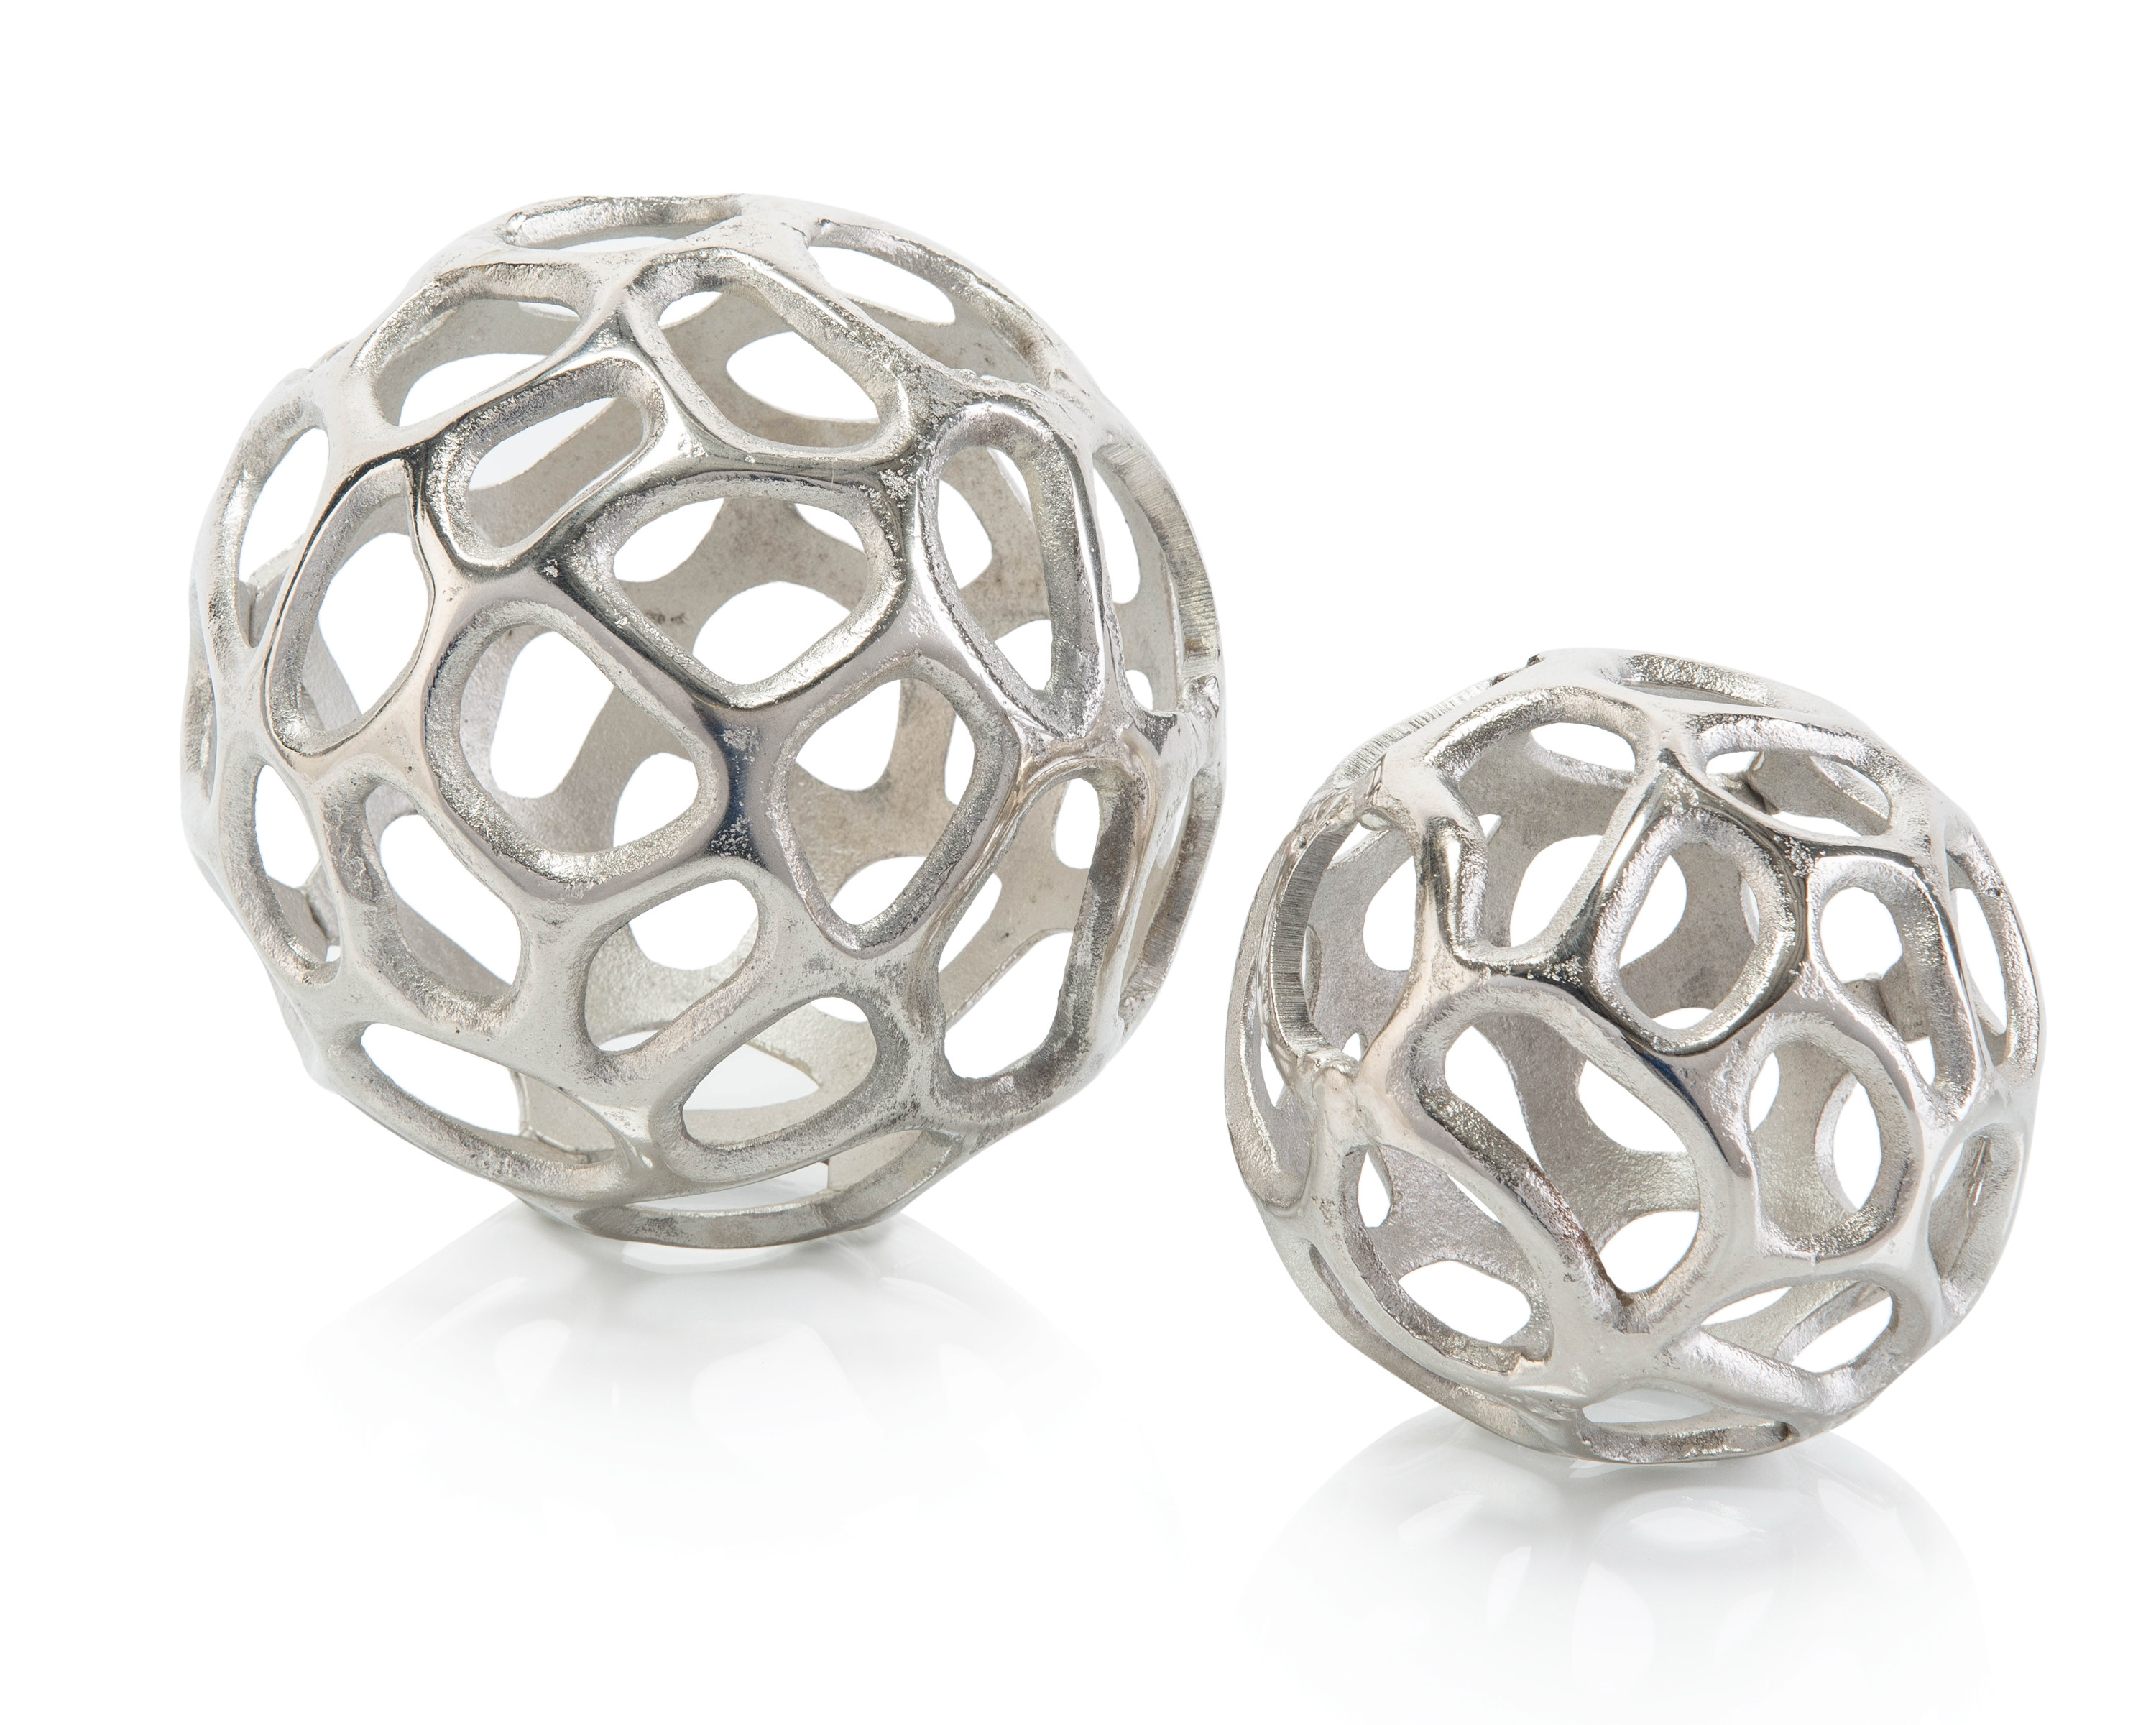 Silver Balls with Holes, Set/2